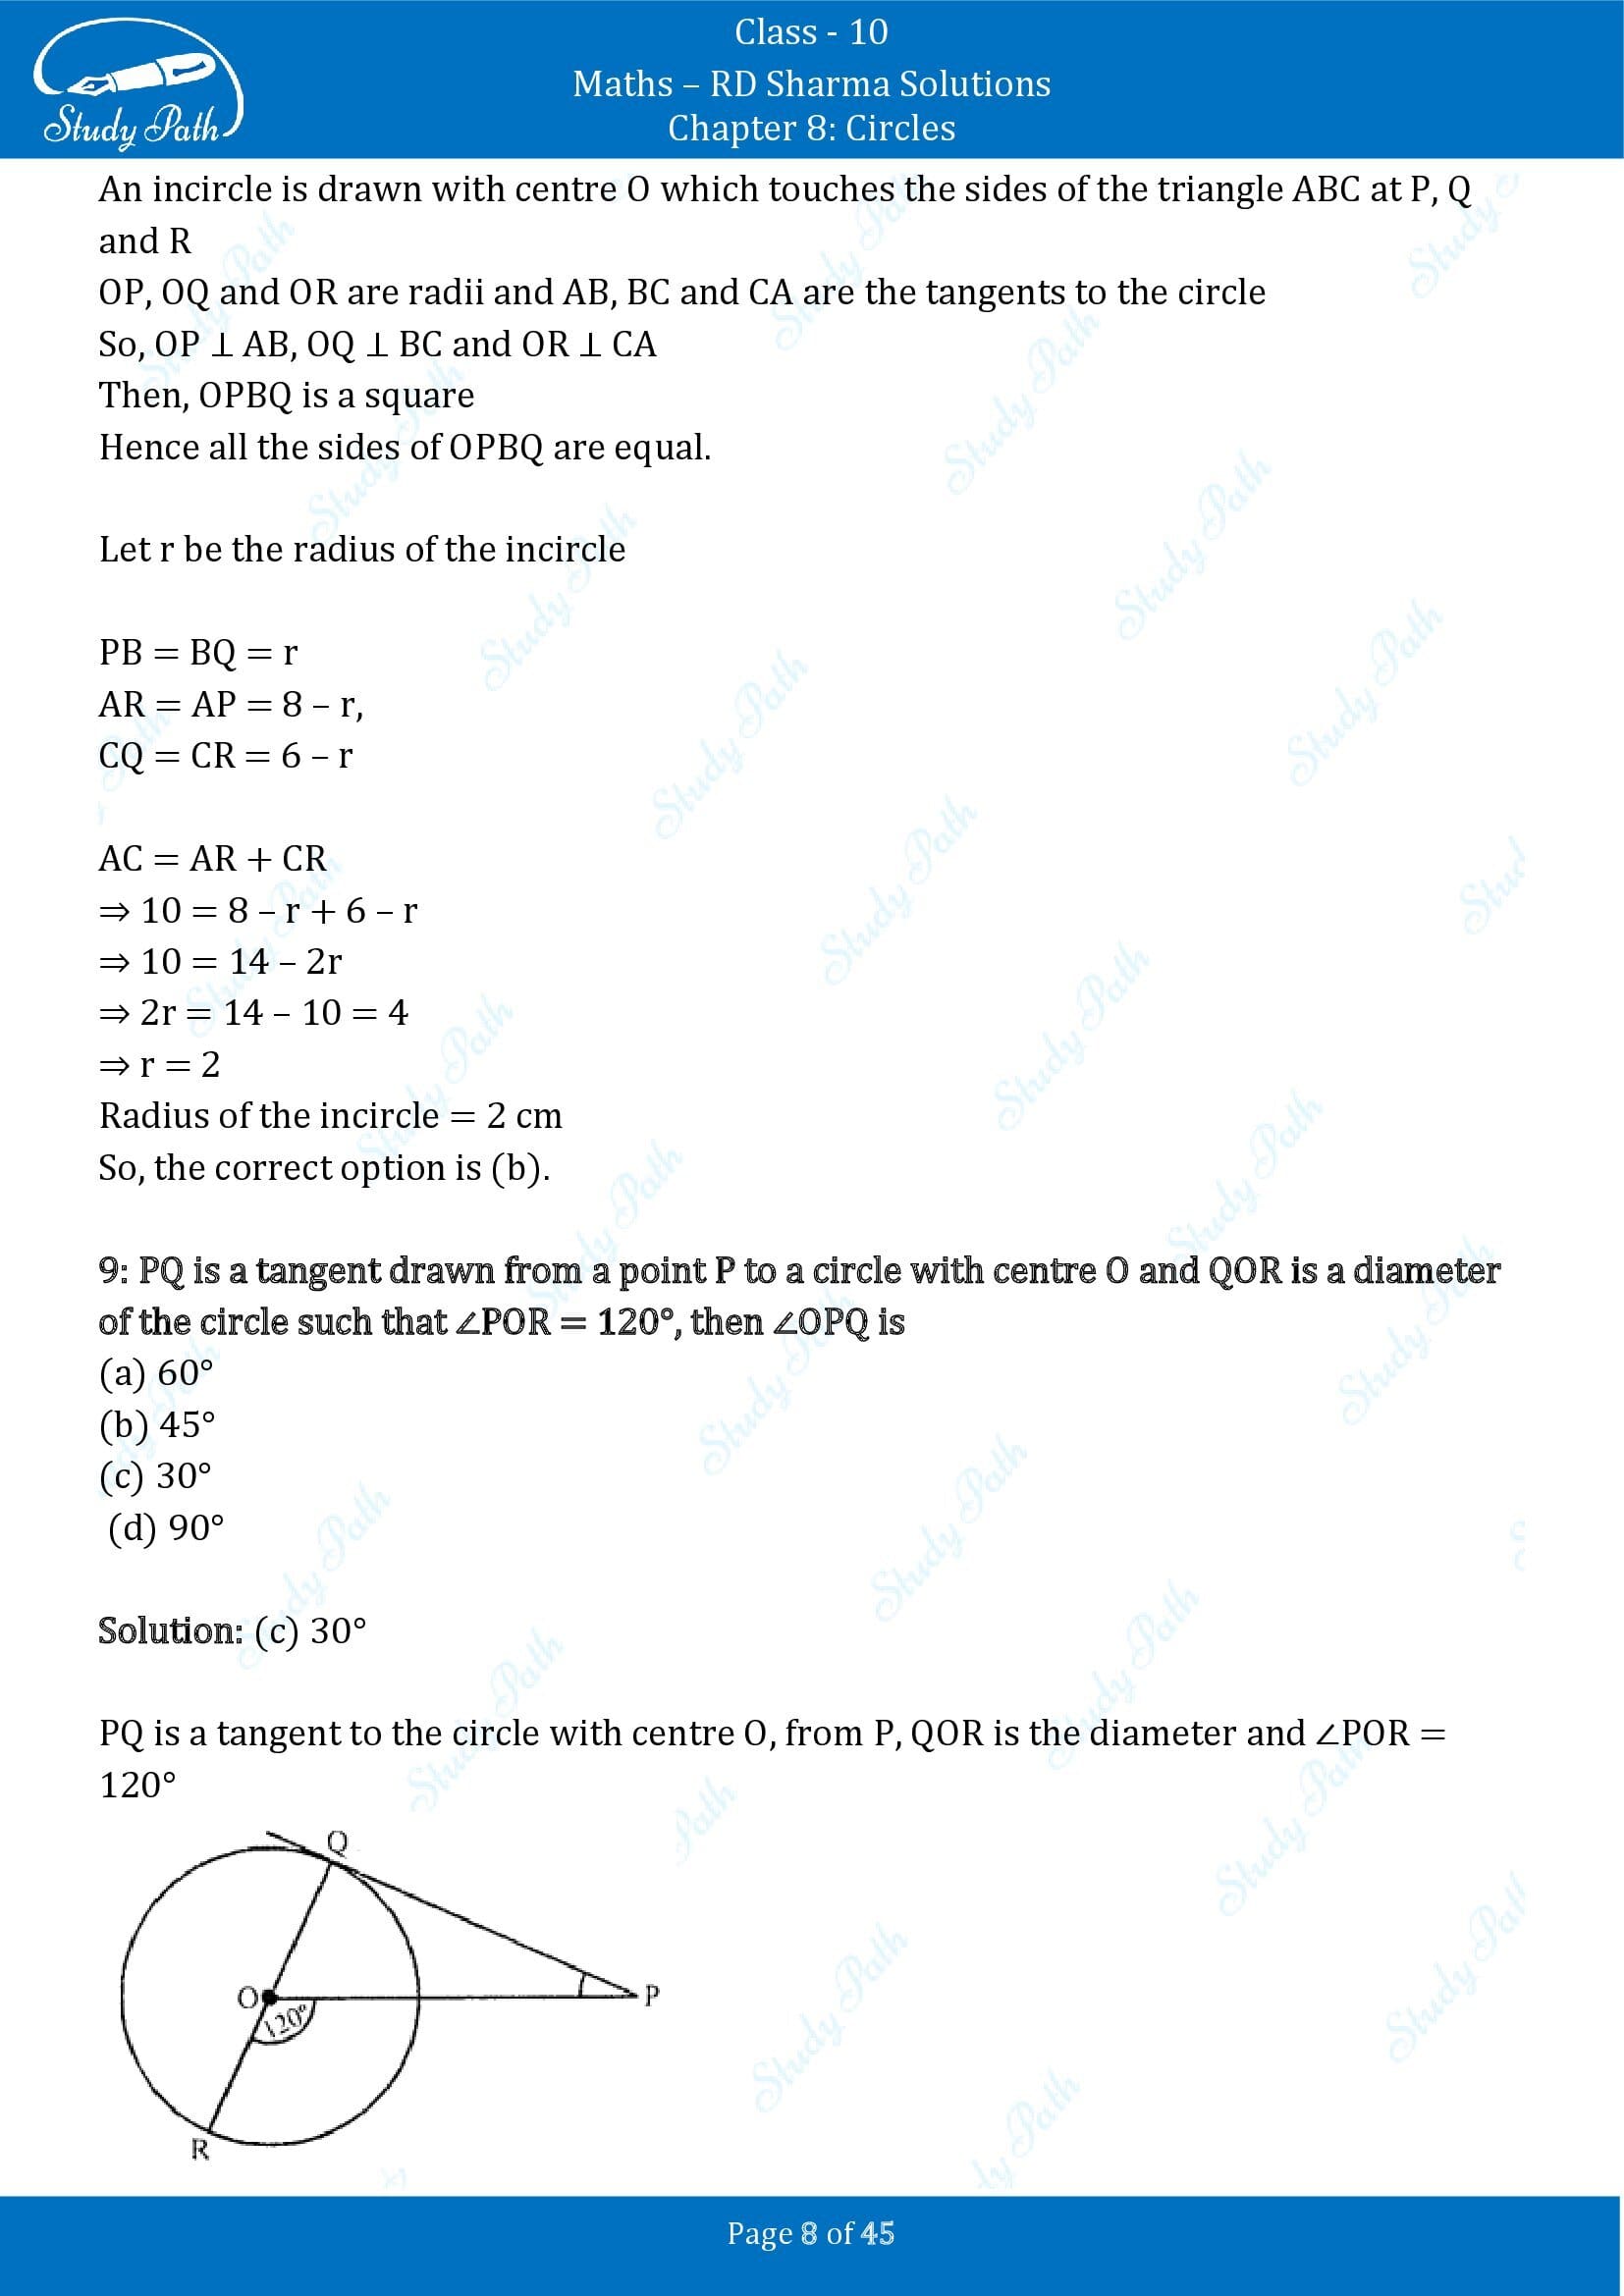 RD Sharma Solutions Class 10 Chapter 8 Circles Multiple Choice Questions MCQs 00008